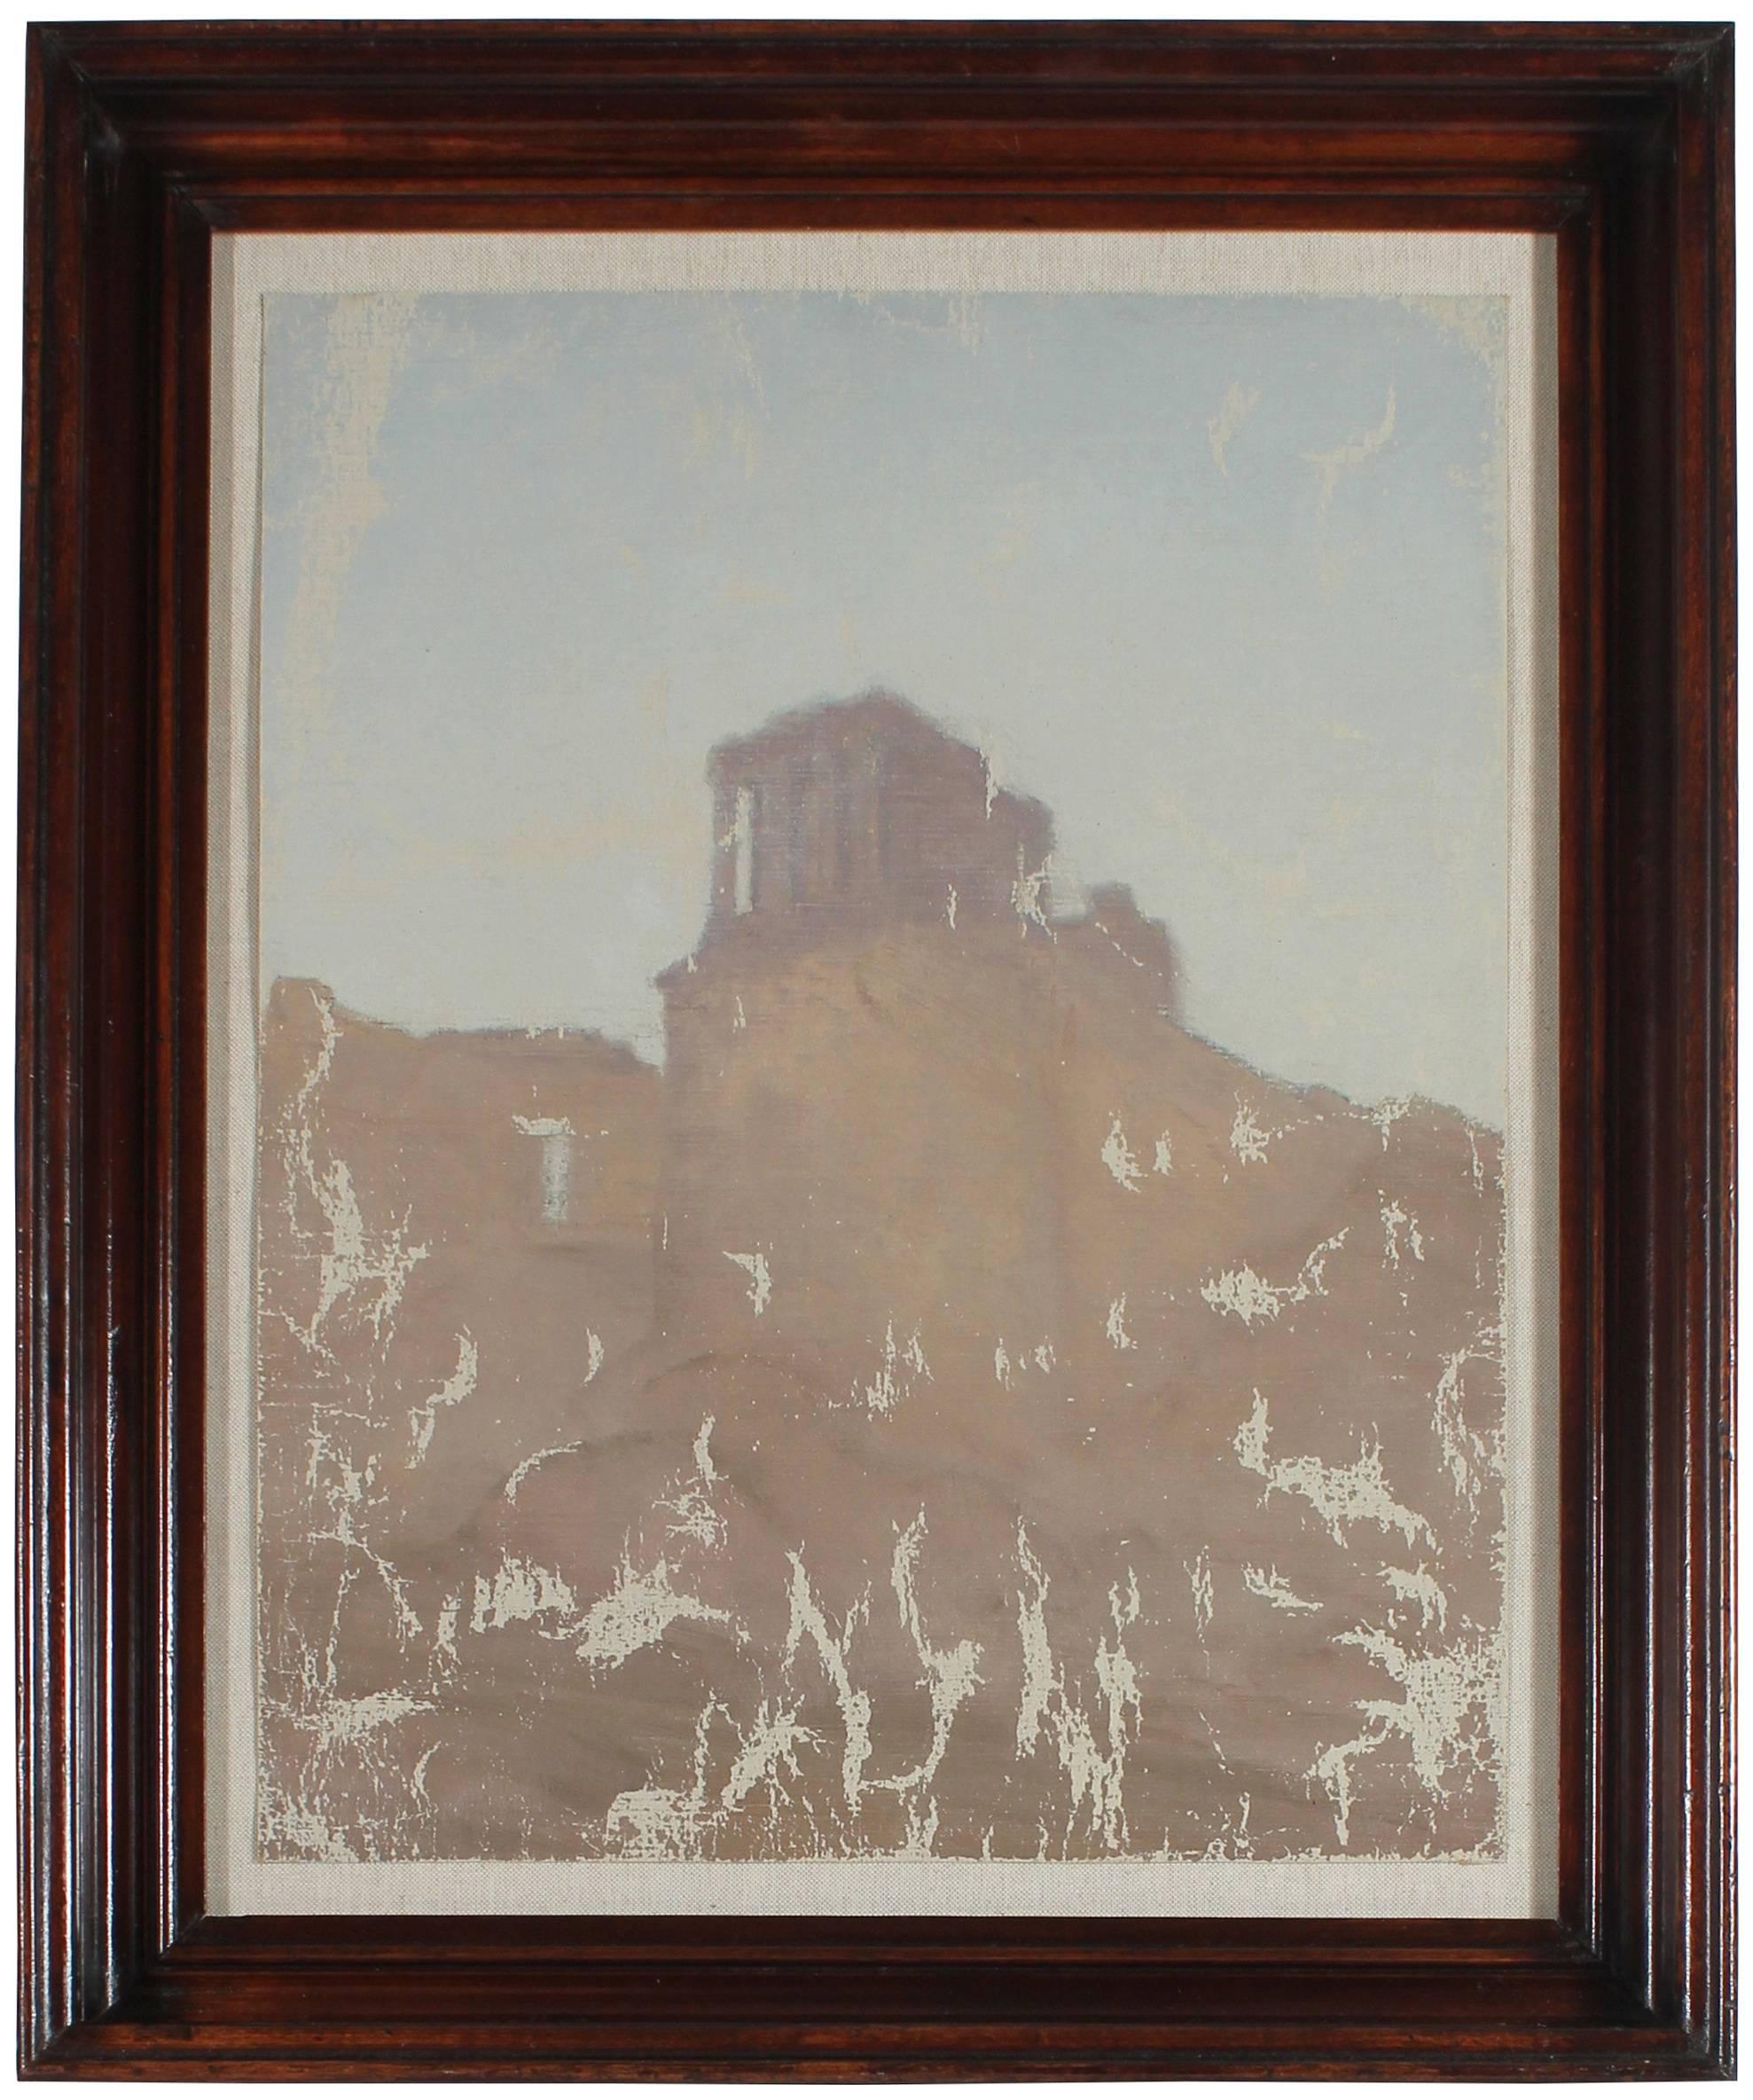 Unknown Landscape Painting - Hazy Ruins on a Hill